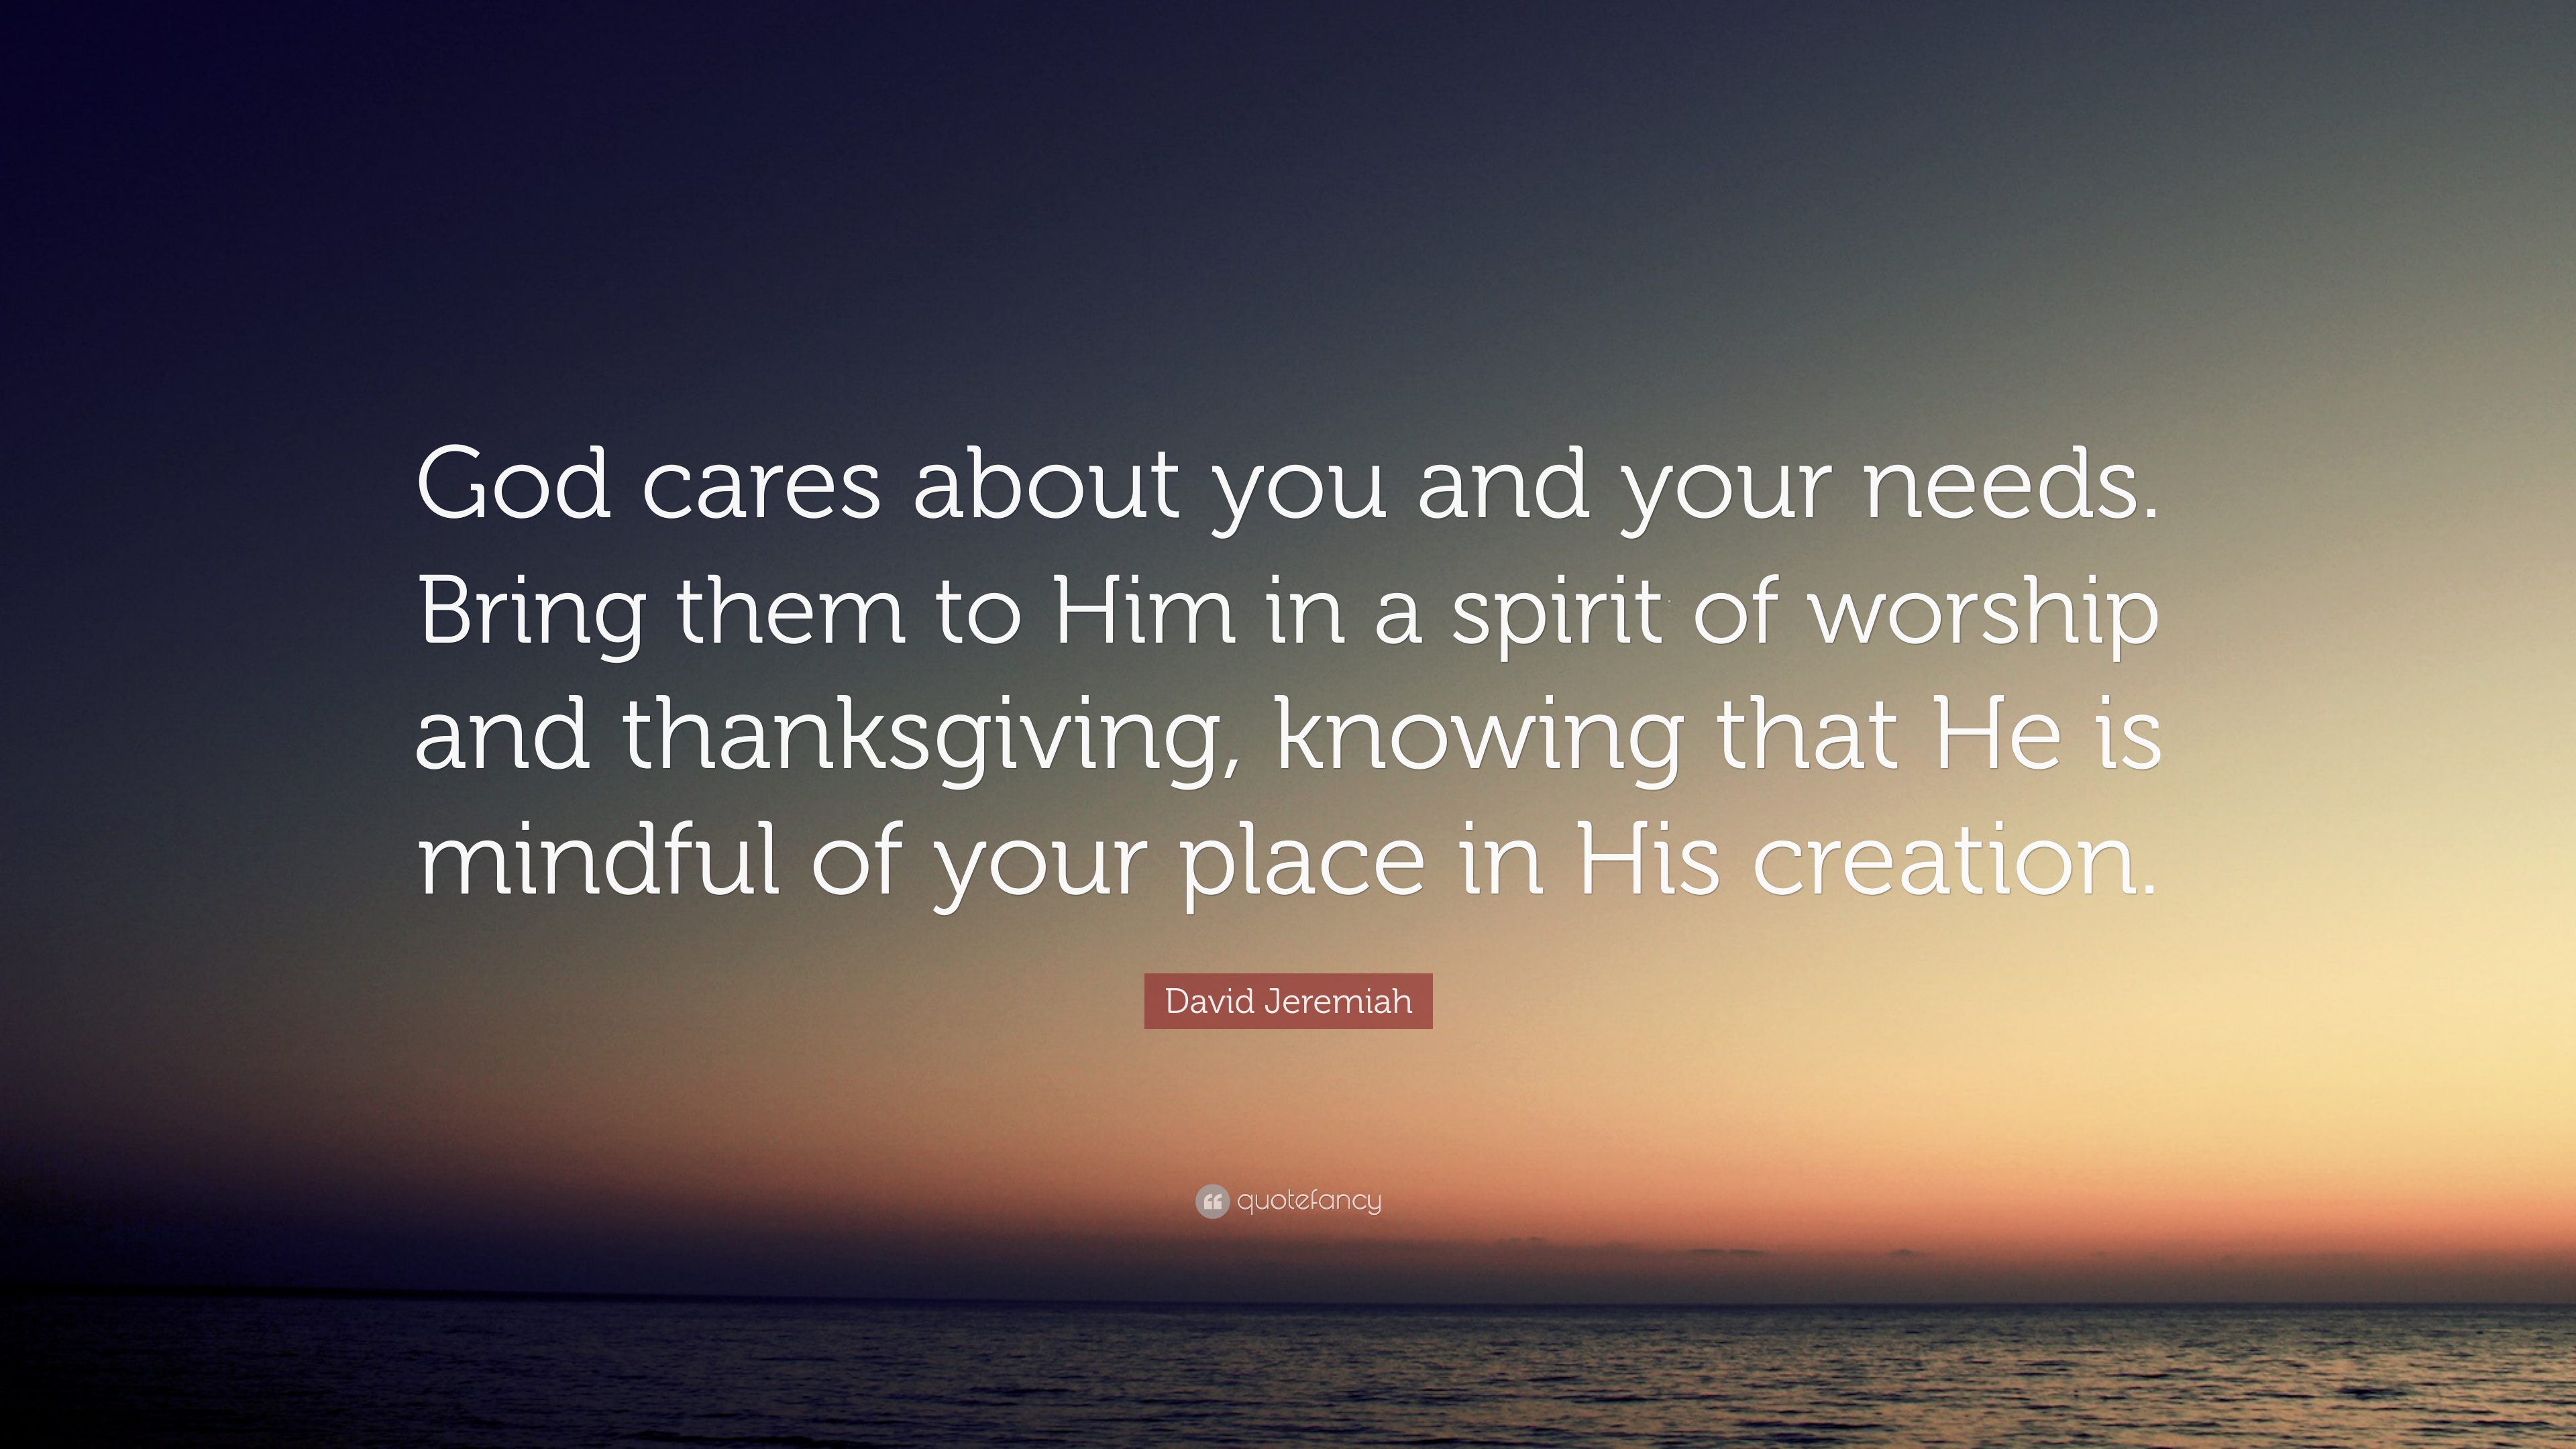 David Jeremiah Quote: “God cares about you and your needs. Bring ...